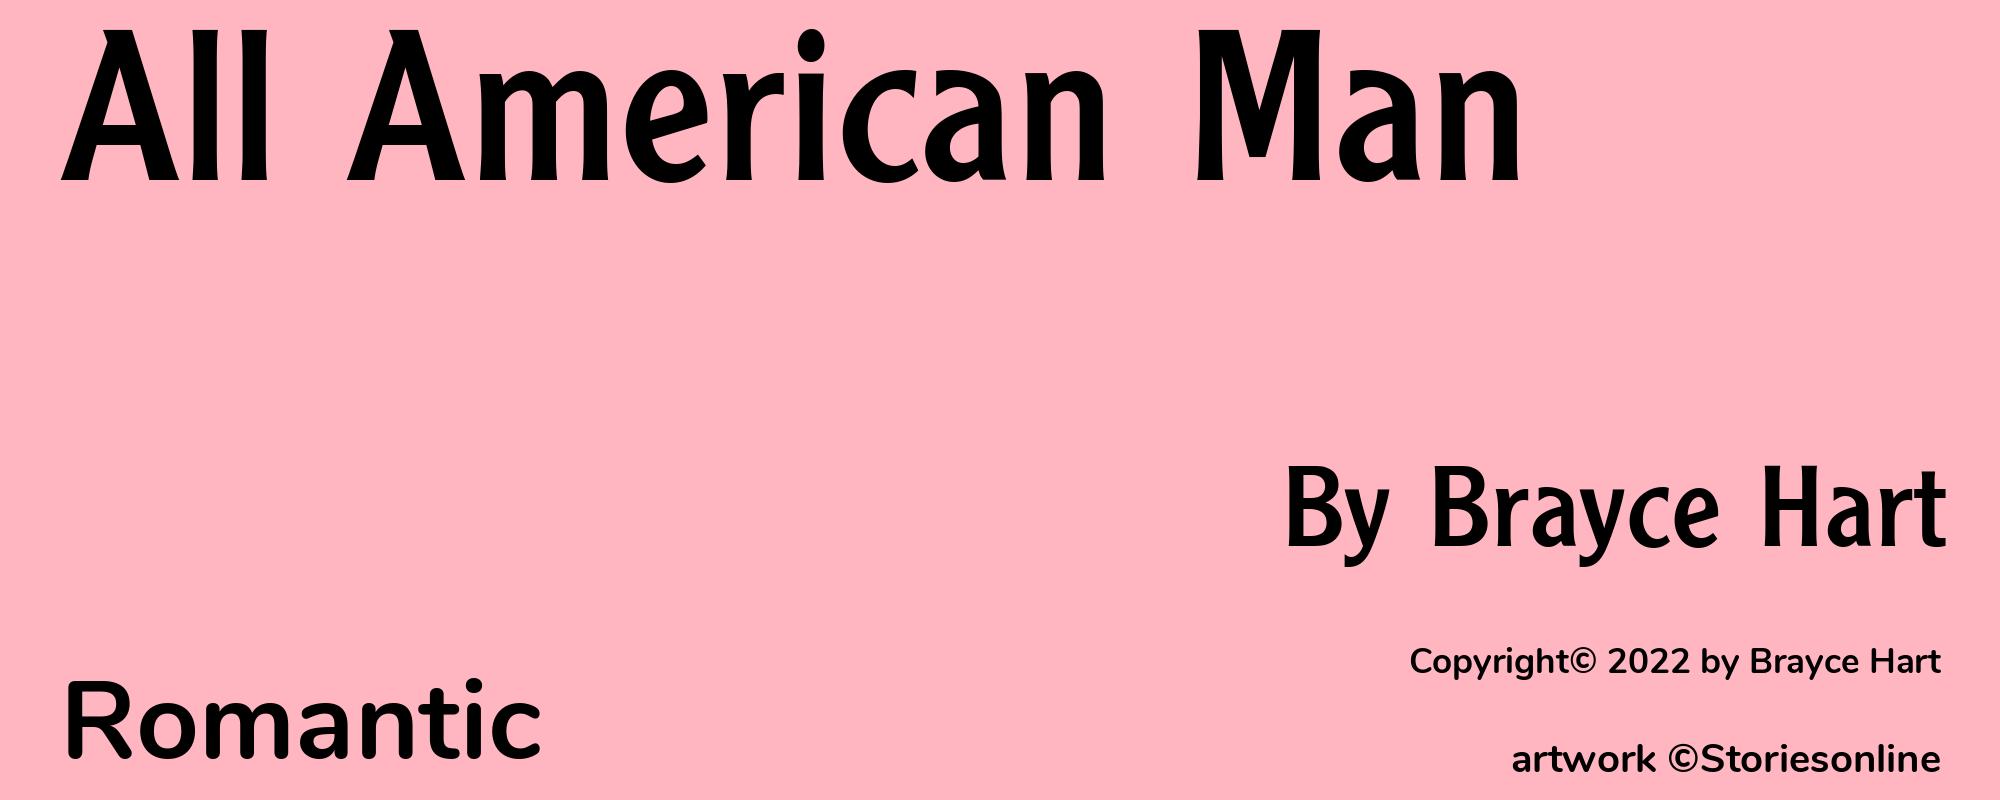 All American Man - Cover